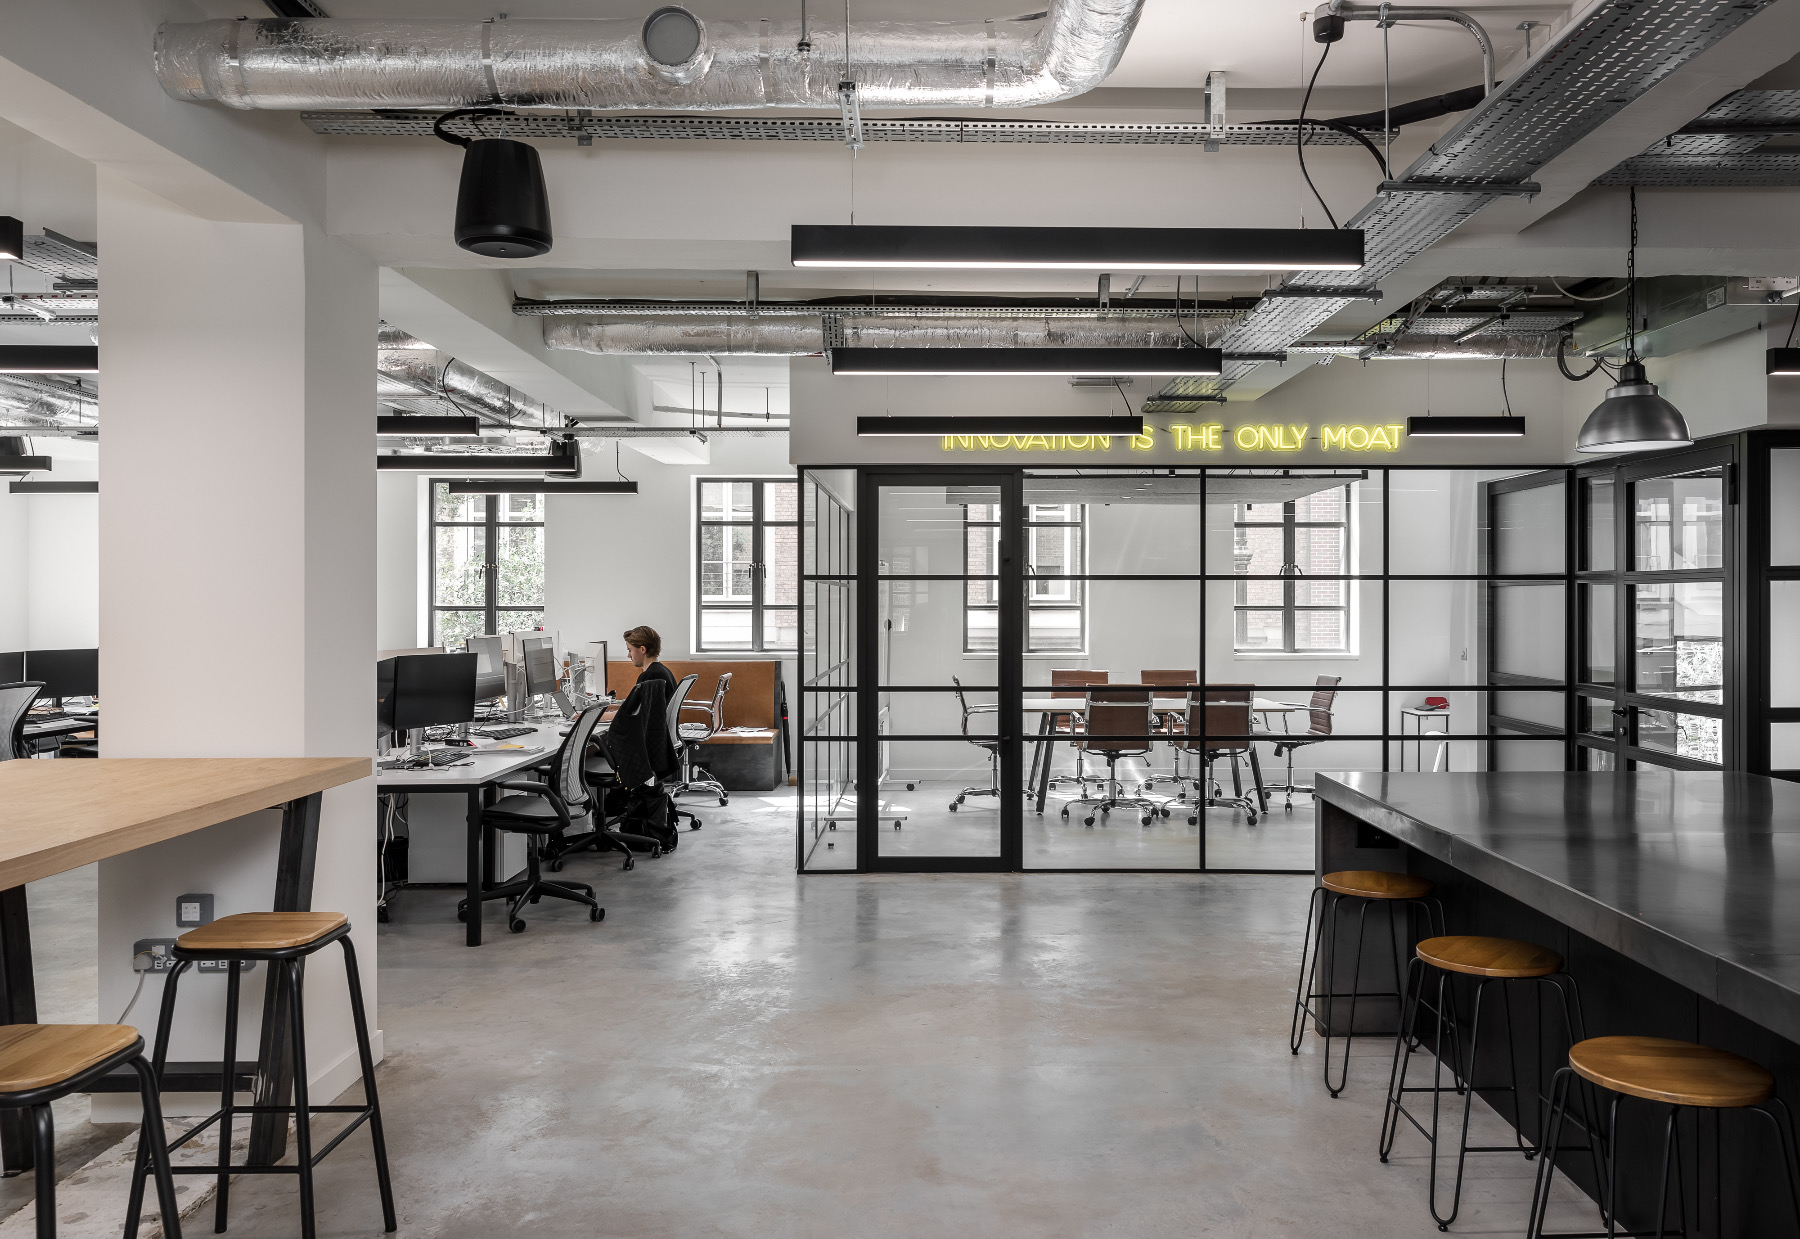 A Look Inside Marcho Partners’ New London Office